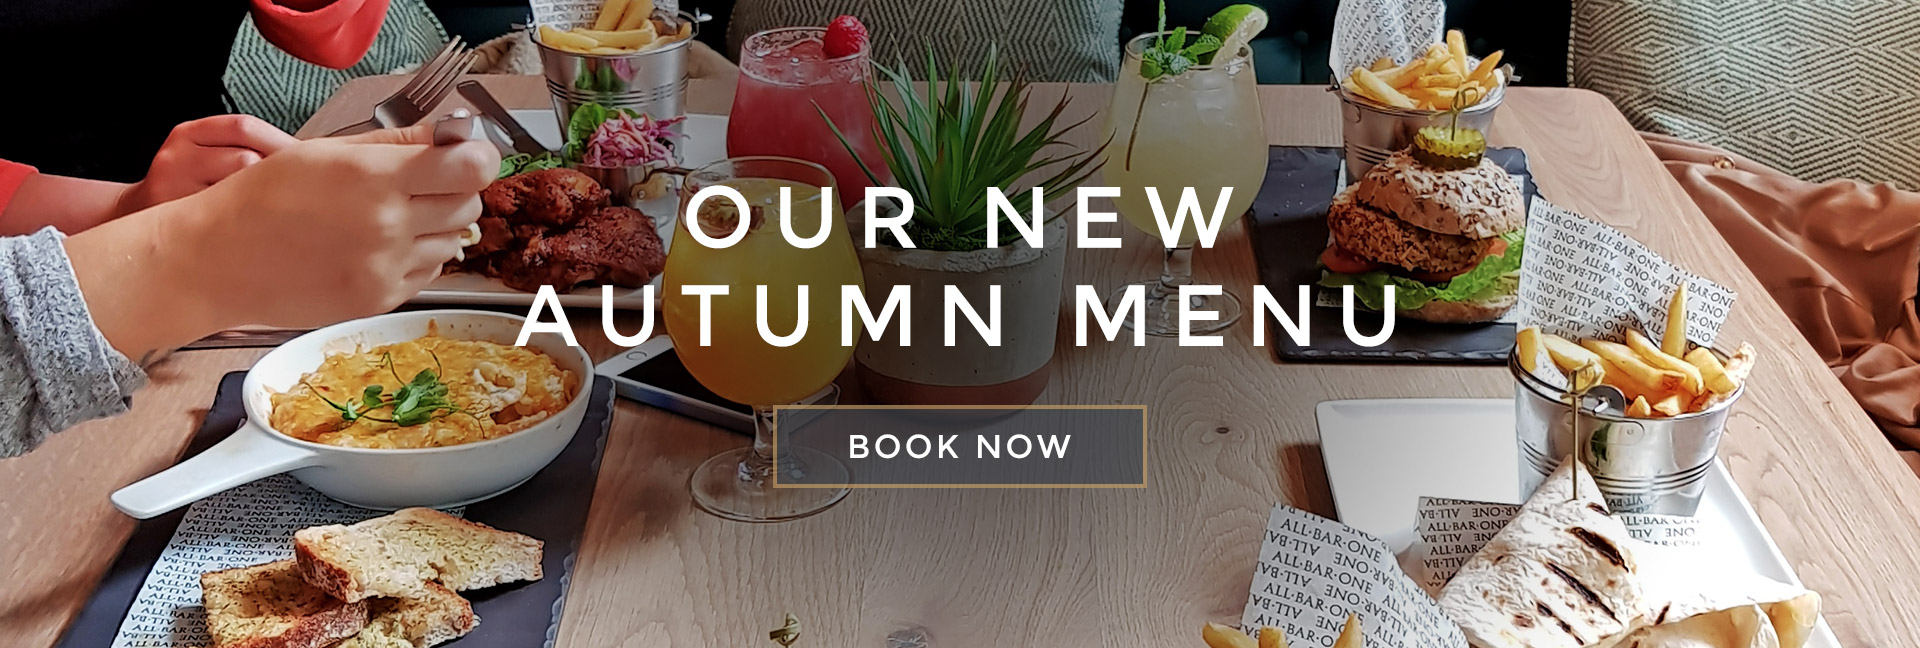 Our new Autumn menu at All Bar One Chester - Book now